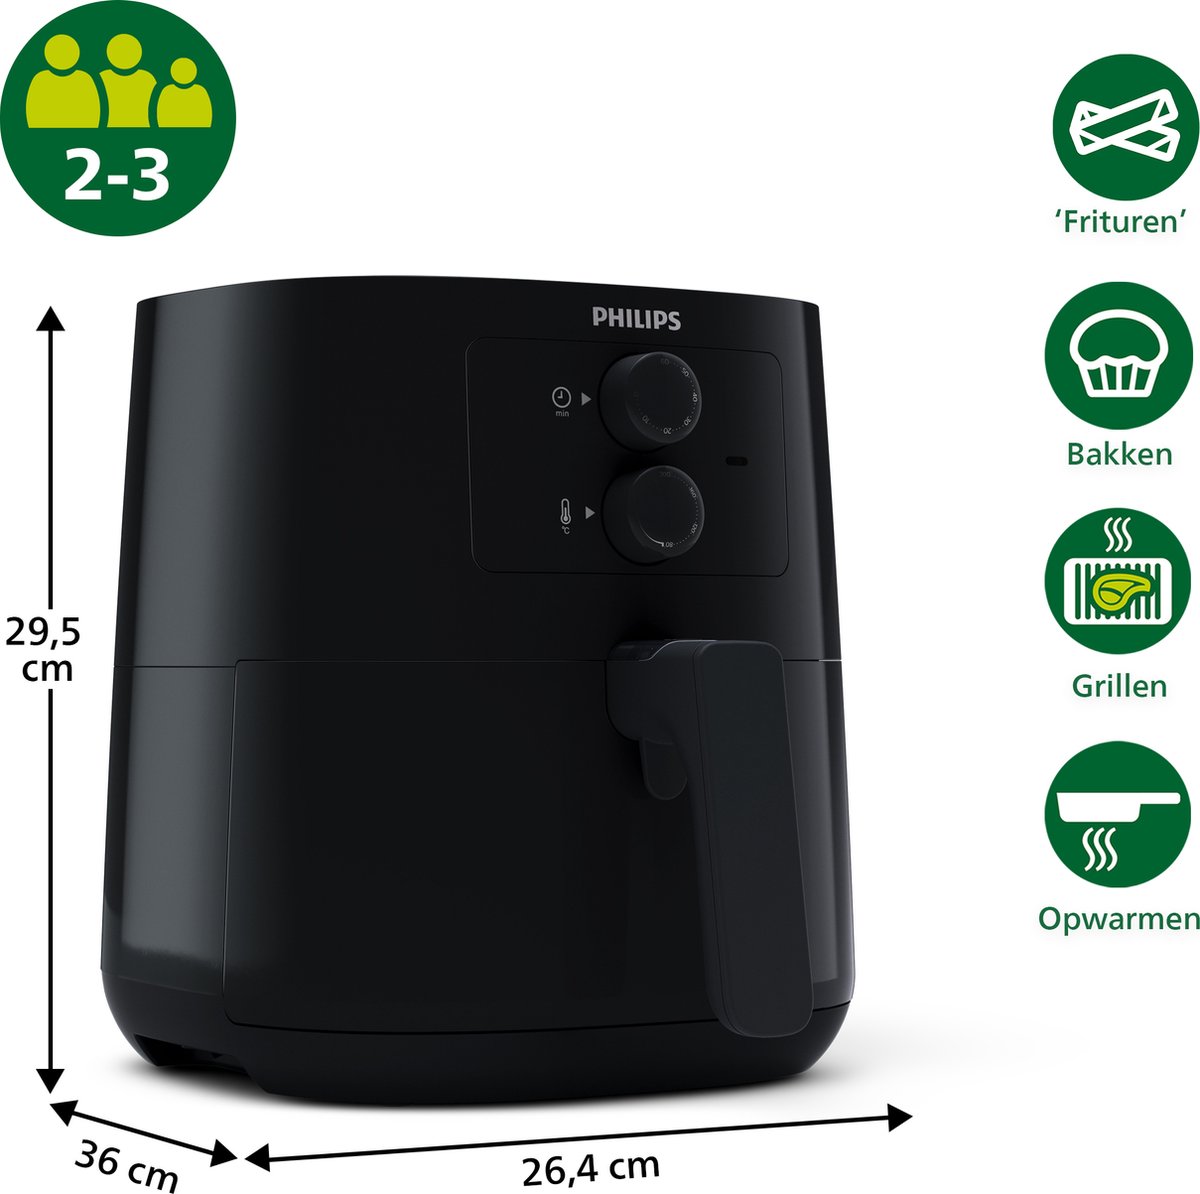 Philips HD9925/01 Airfryer Kit plat de cuisson, Muffincups